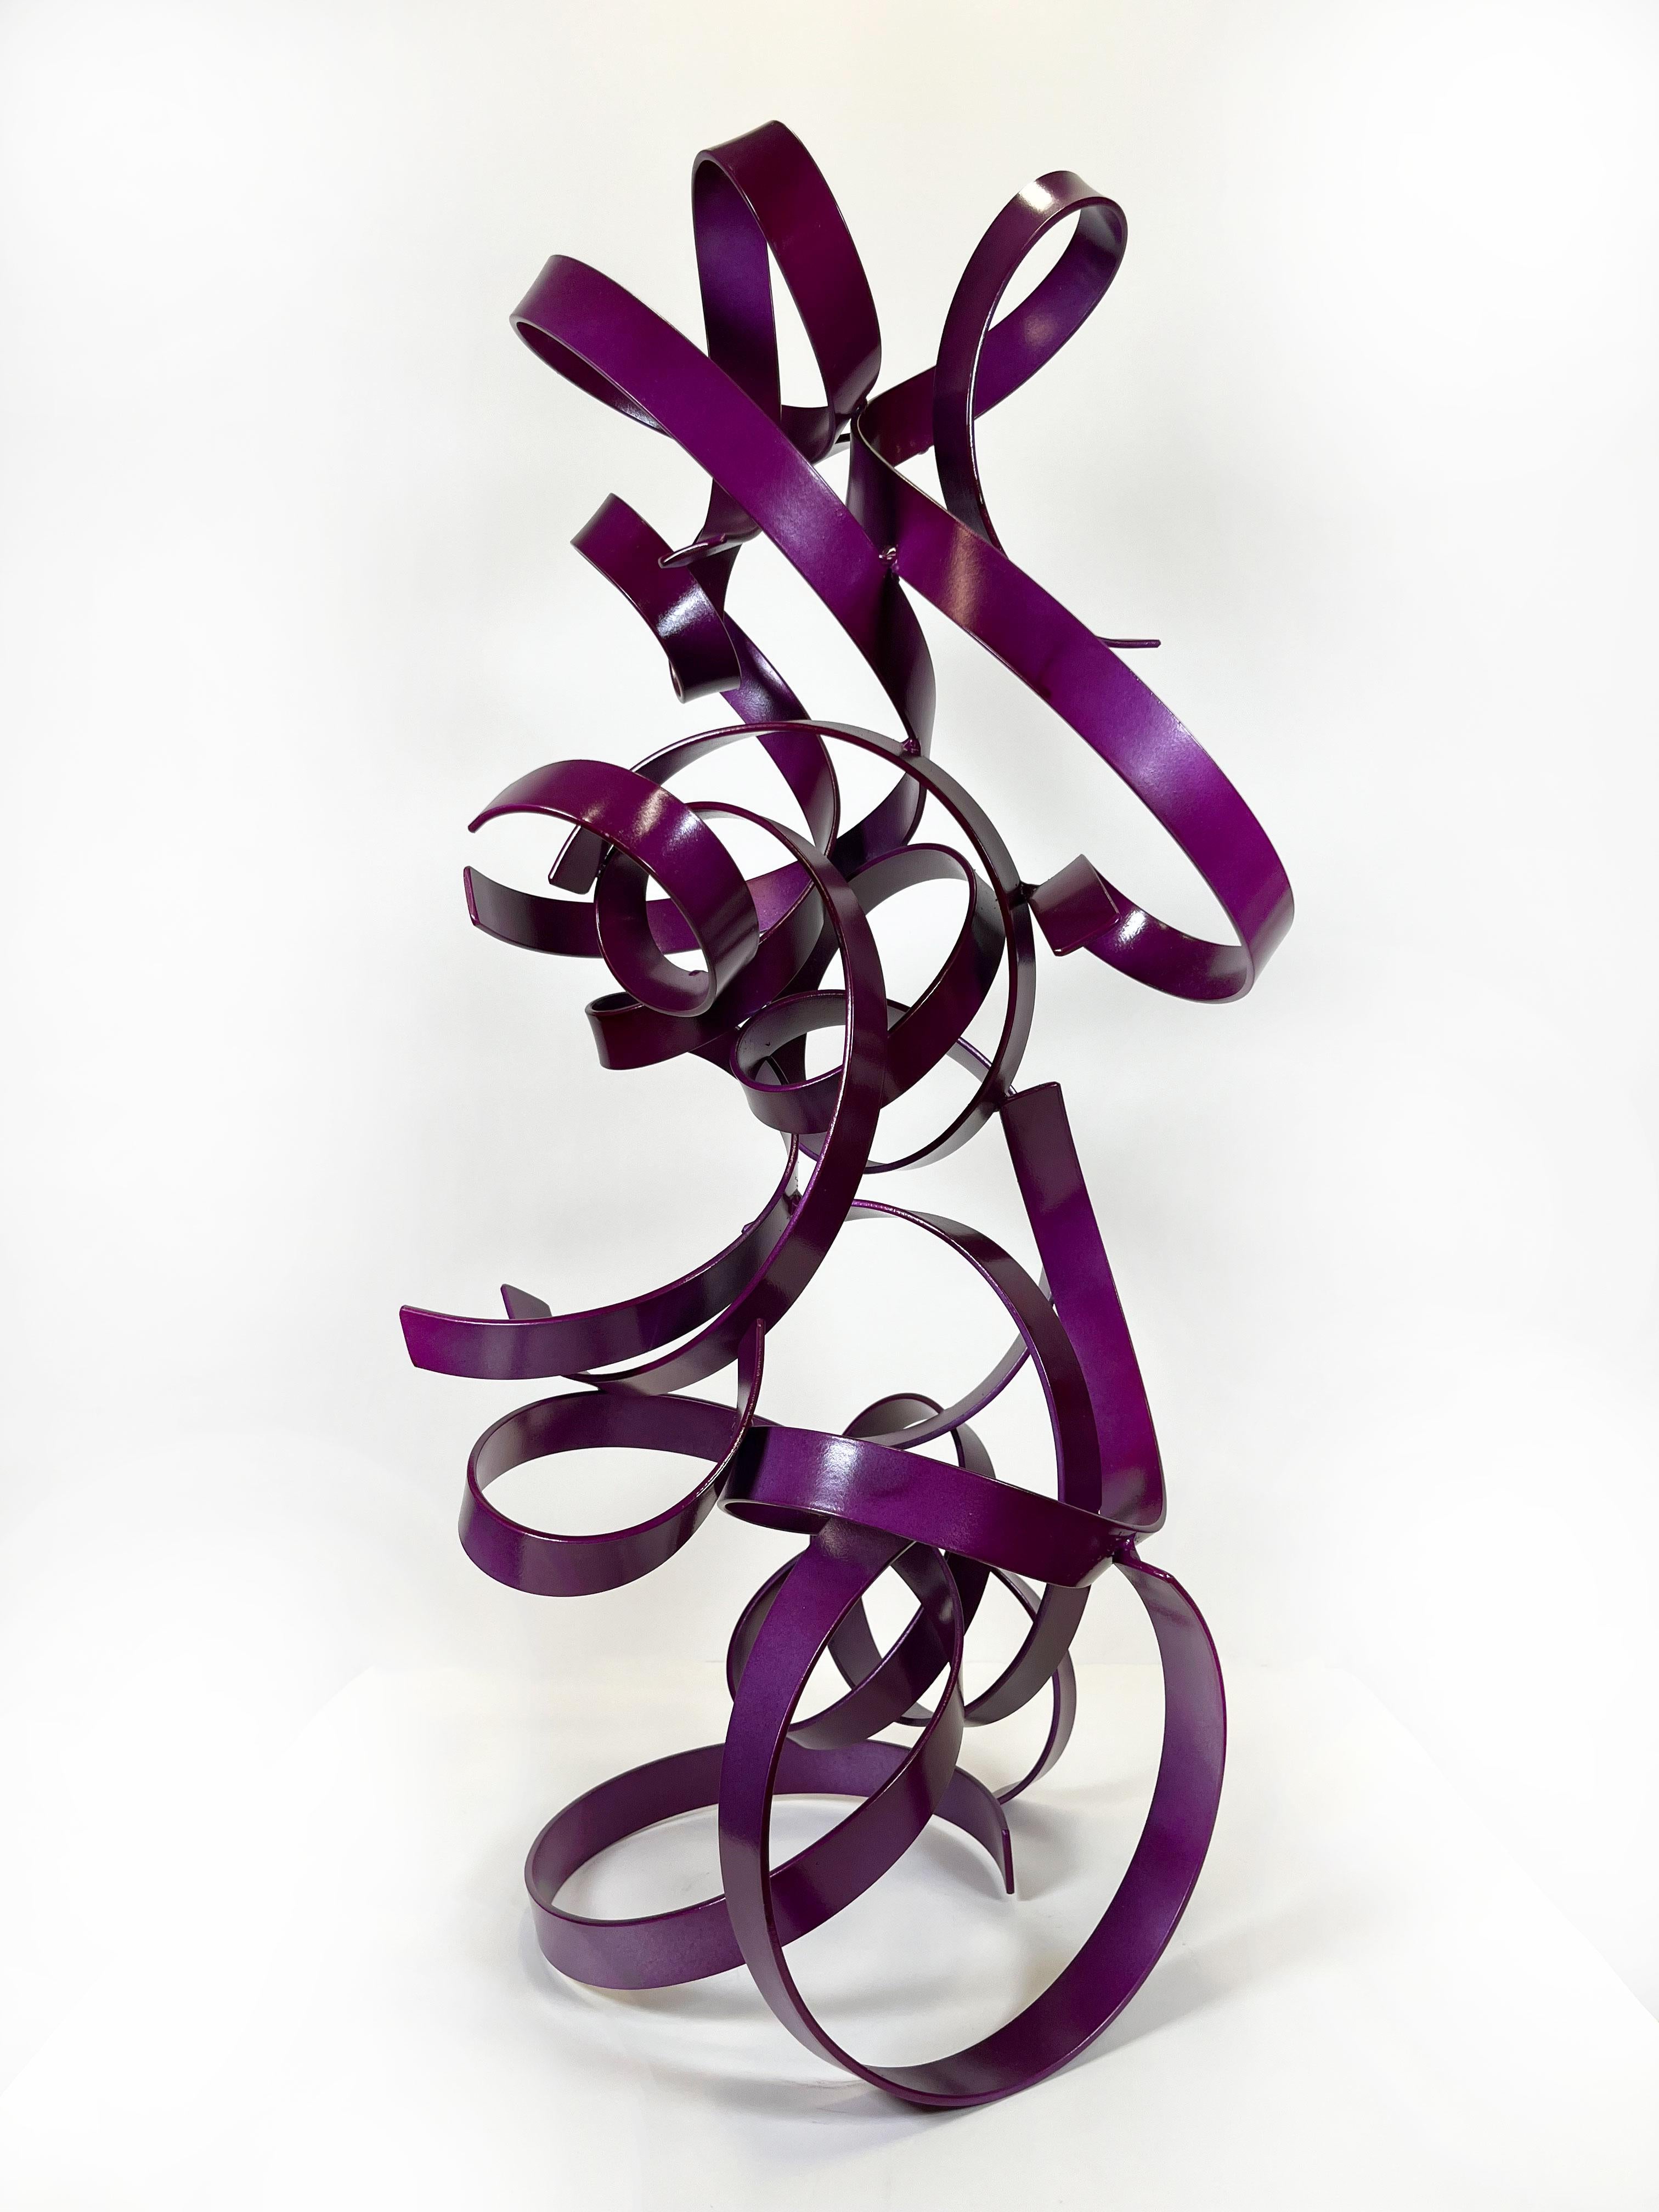 Beautiful Purple Chaos colorful metal 3D sculpture made of bent steel 